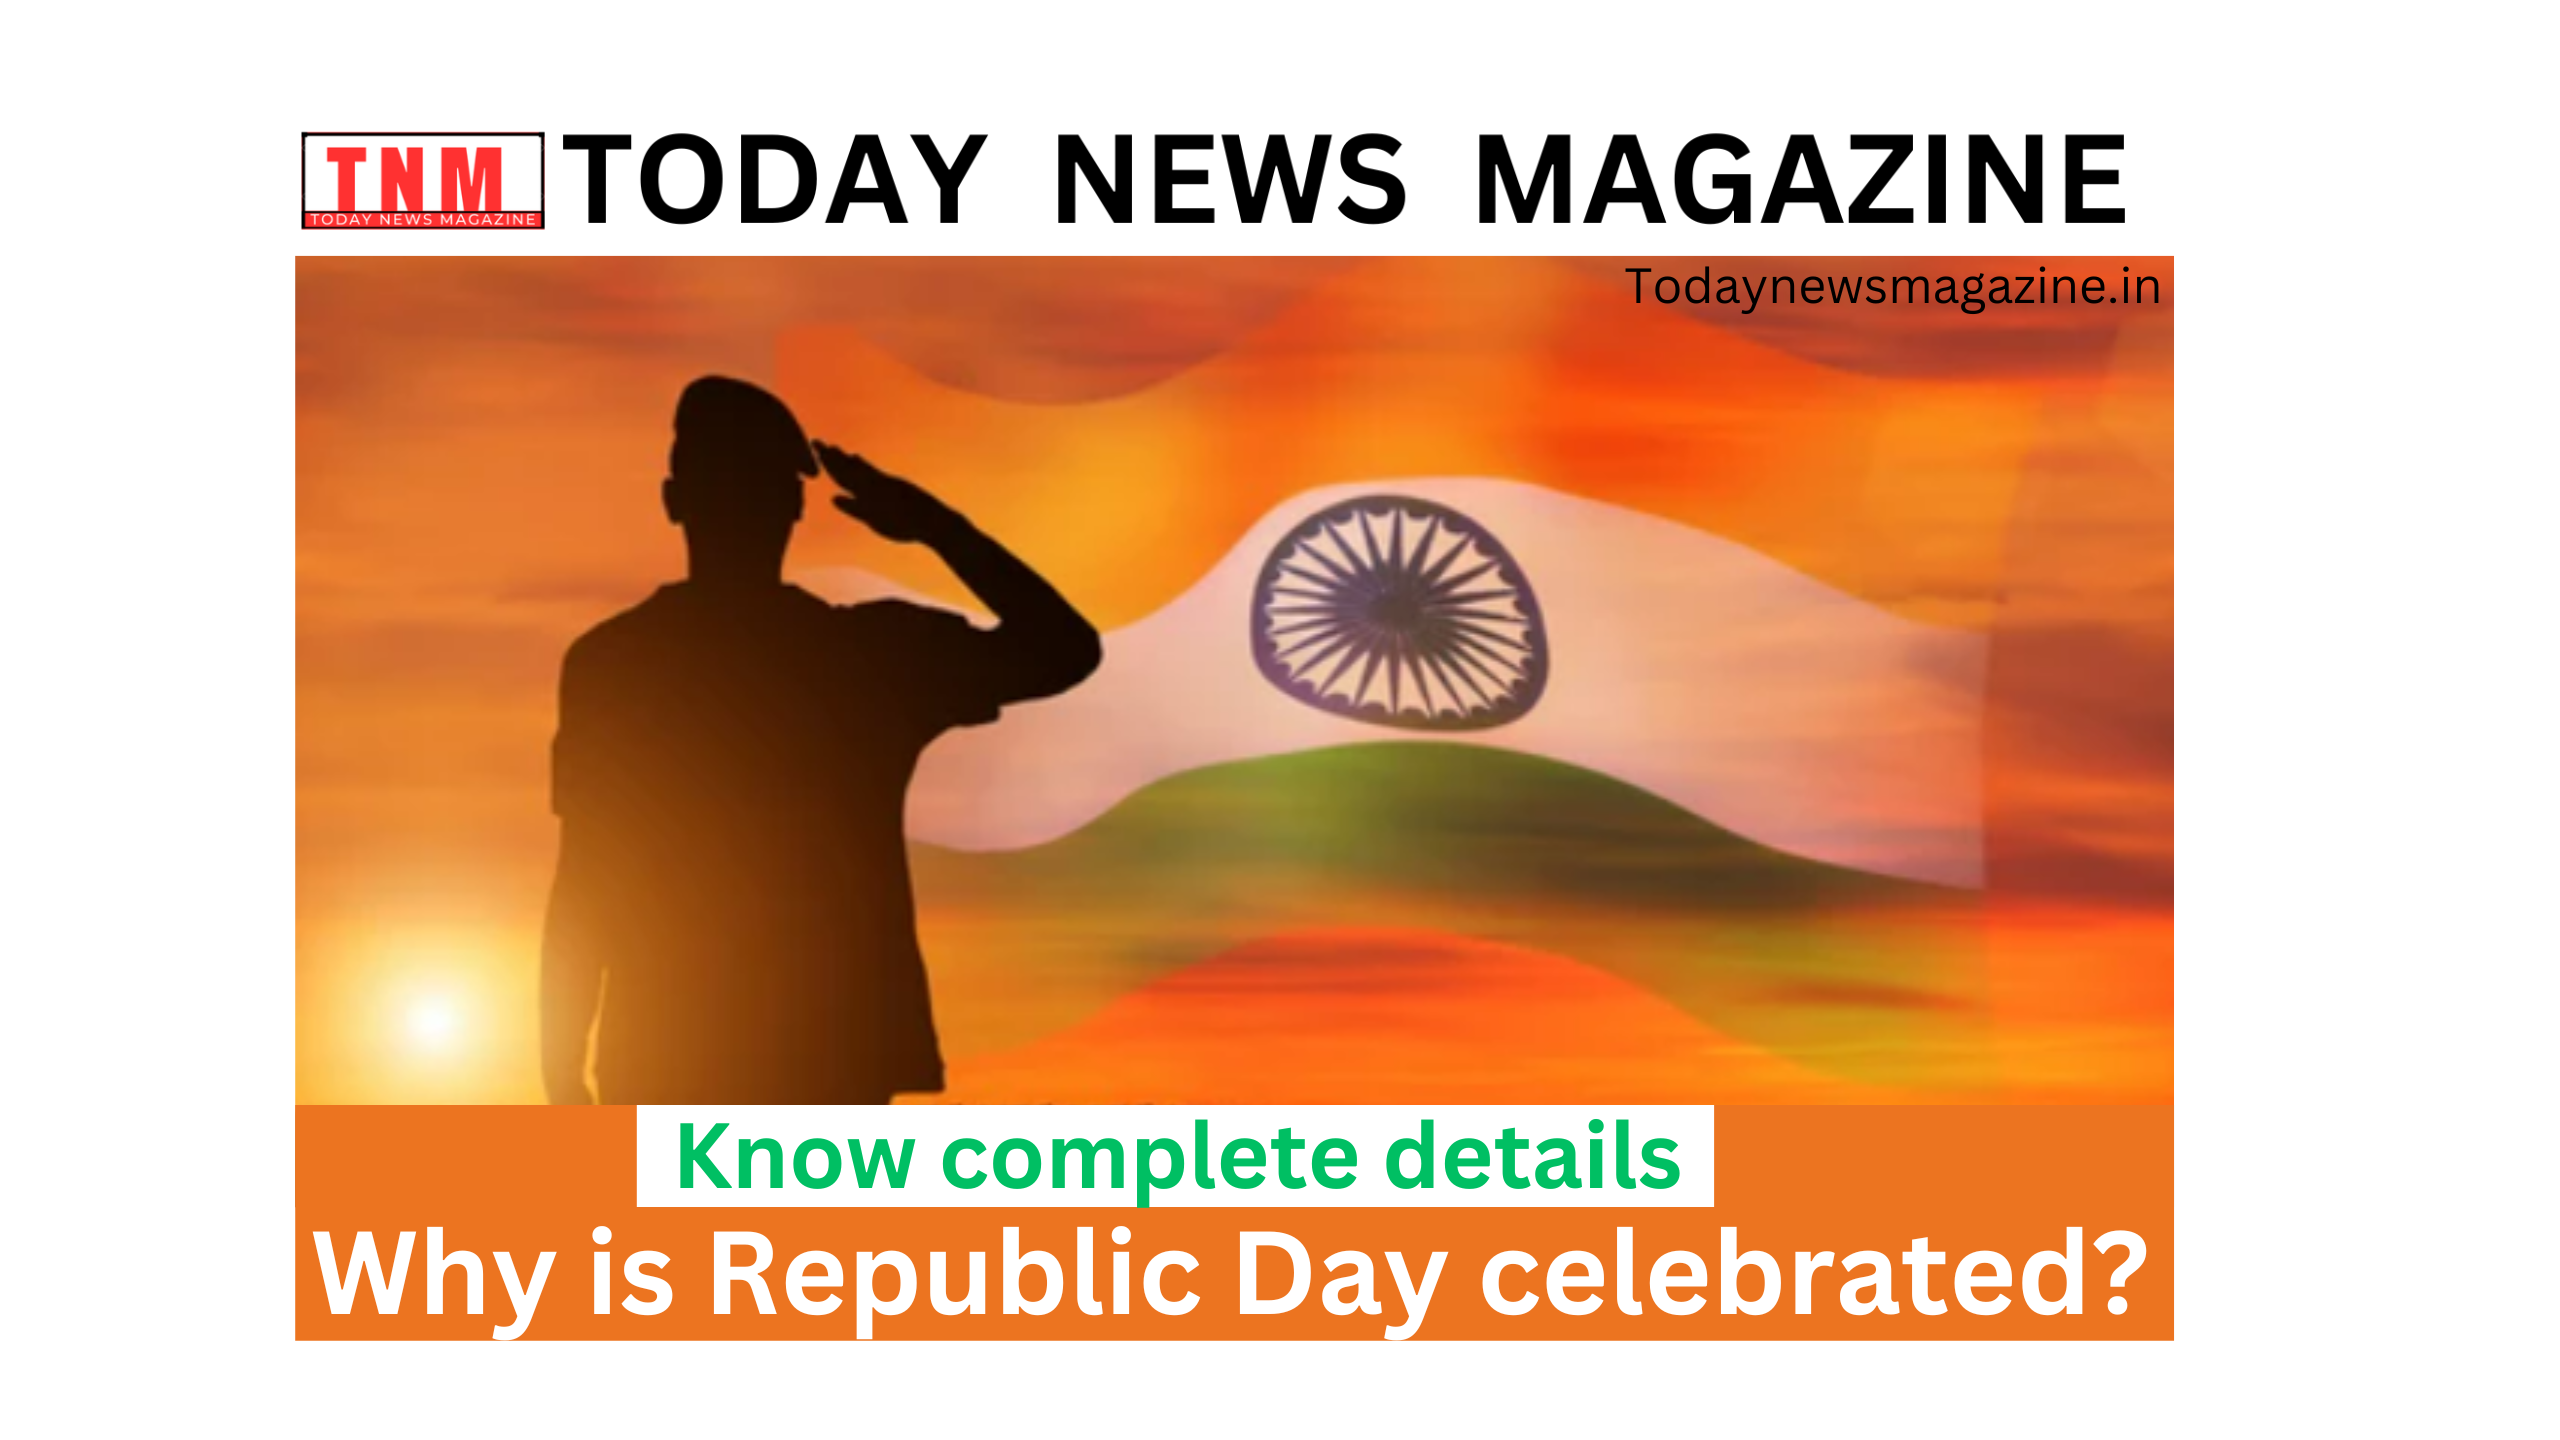 Why is Republic Day celebrated?